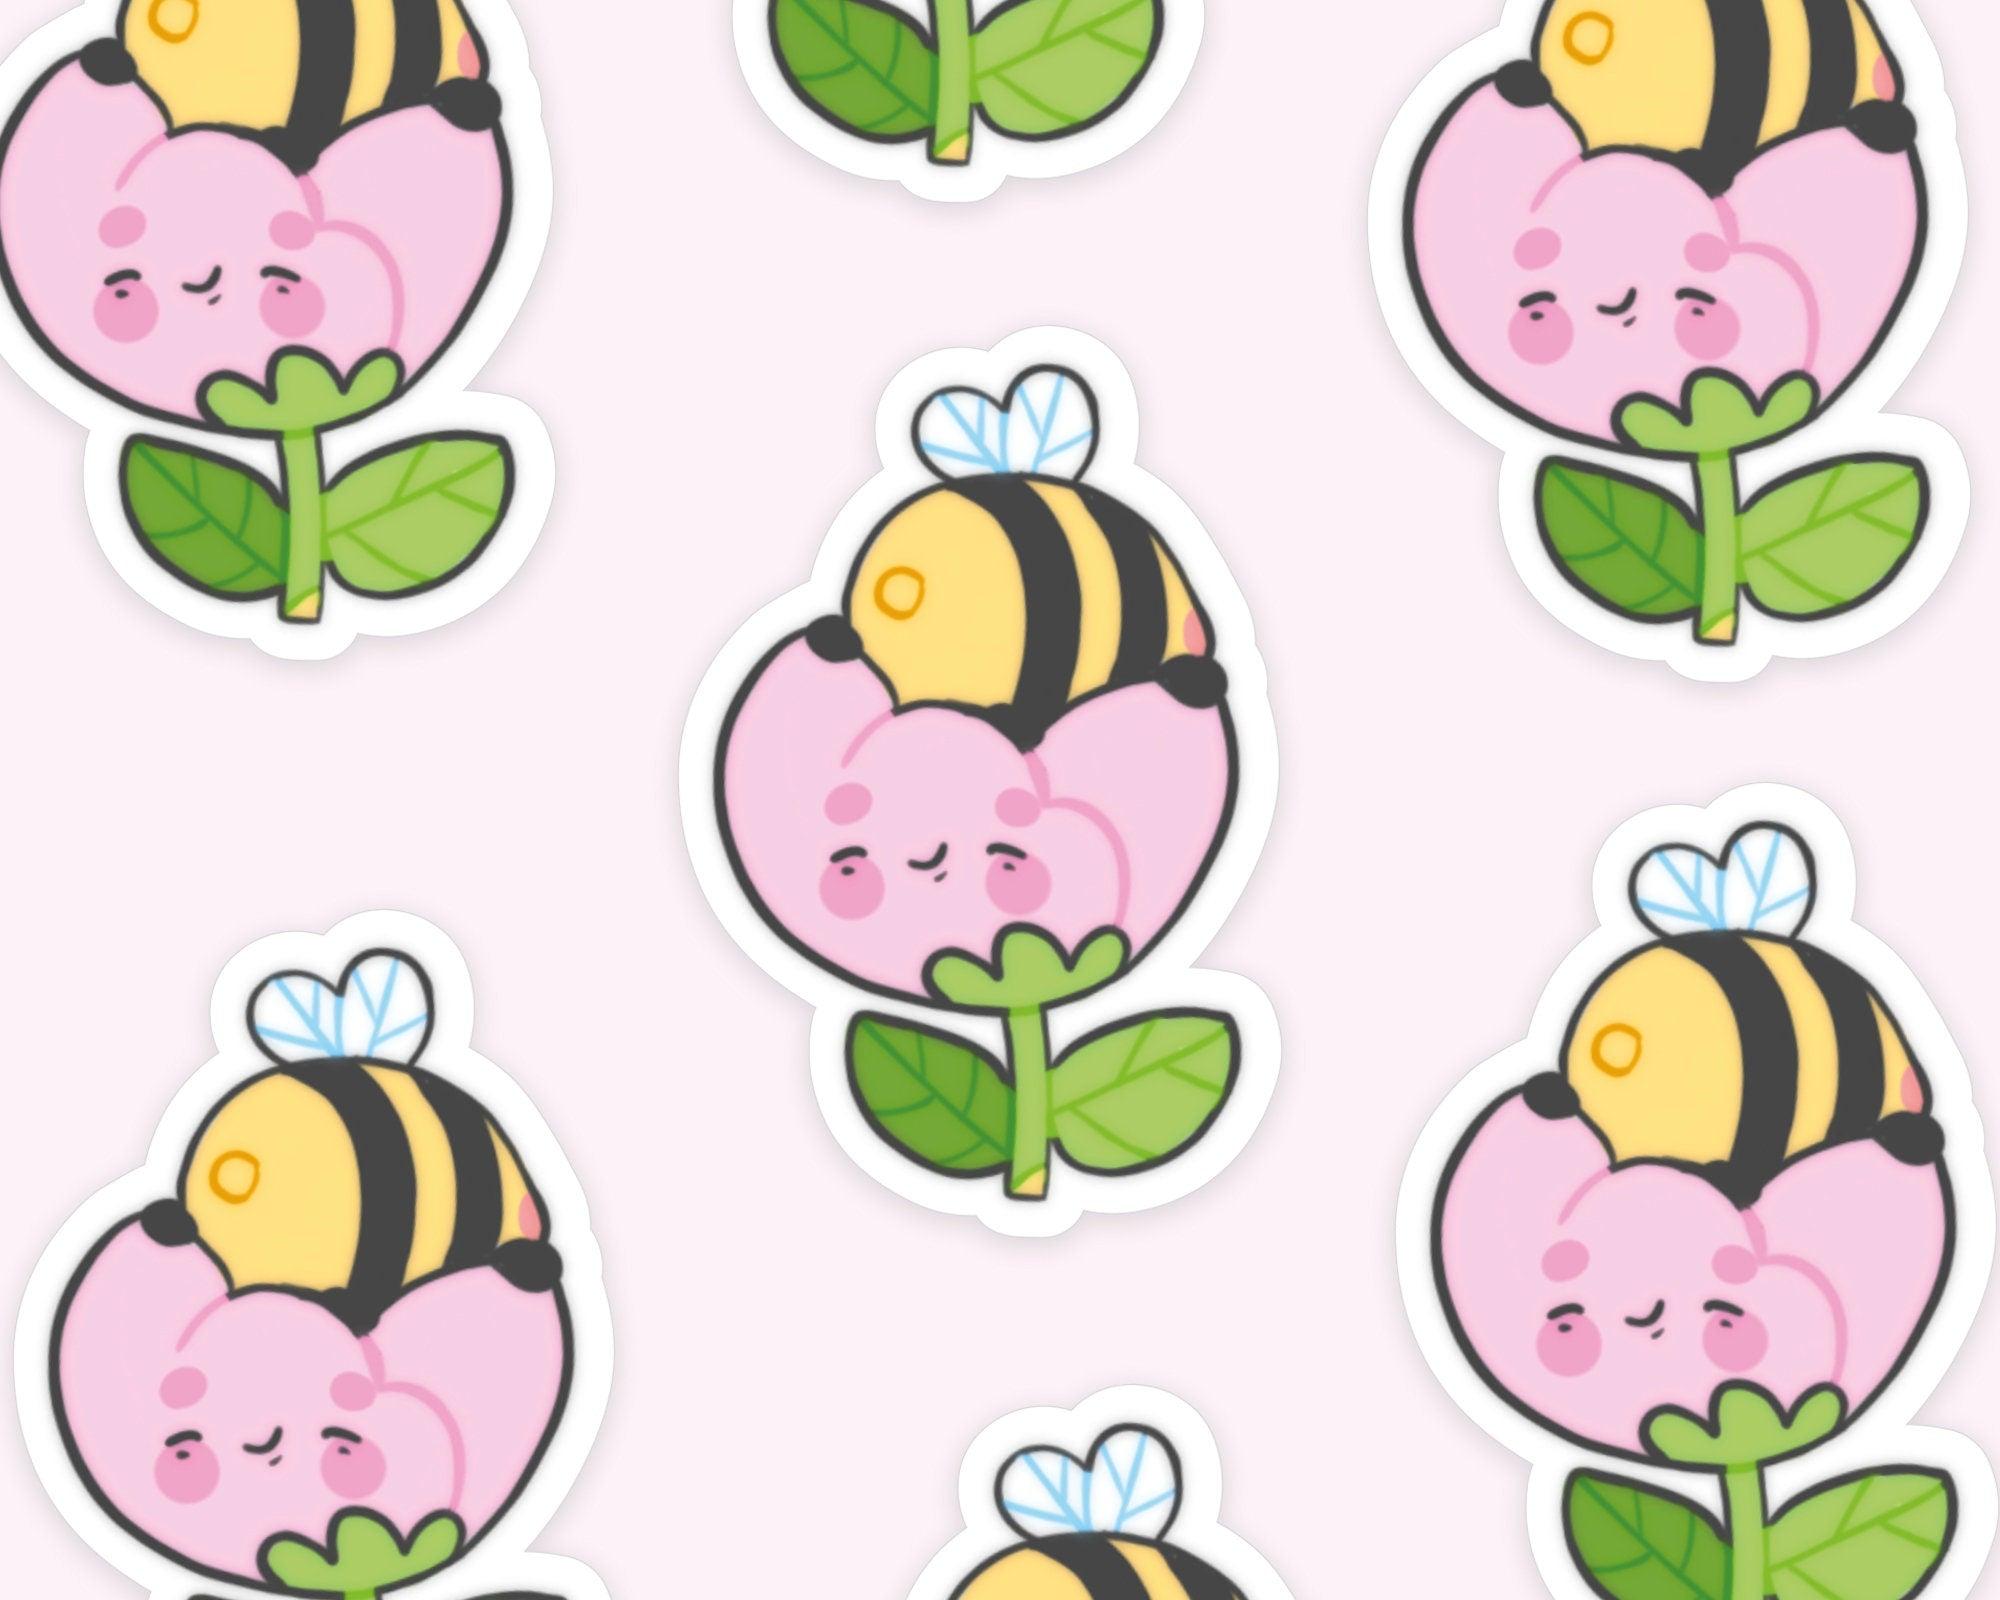 Sleepy Bumblebutt peony sticker, handmade and illustrated, perfect for planners, laptops, and scrapbooks.